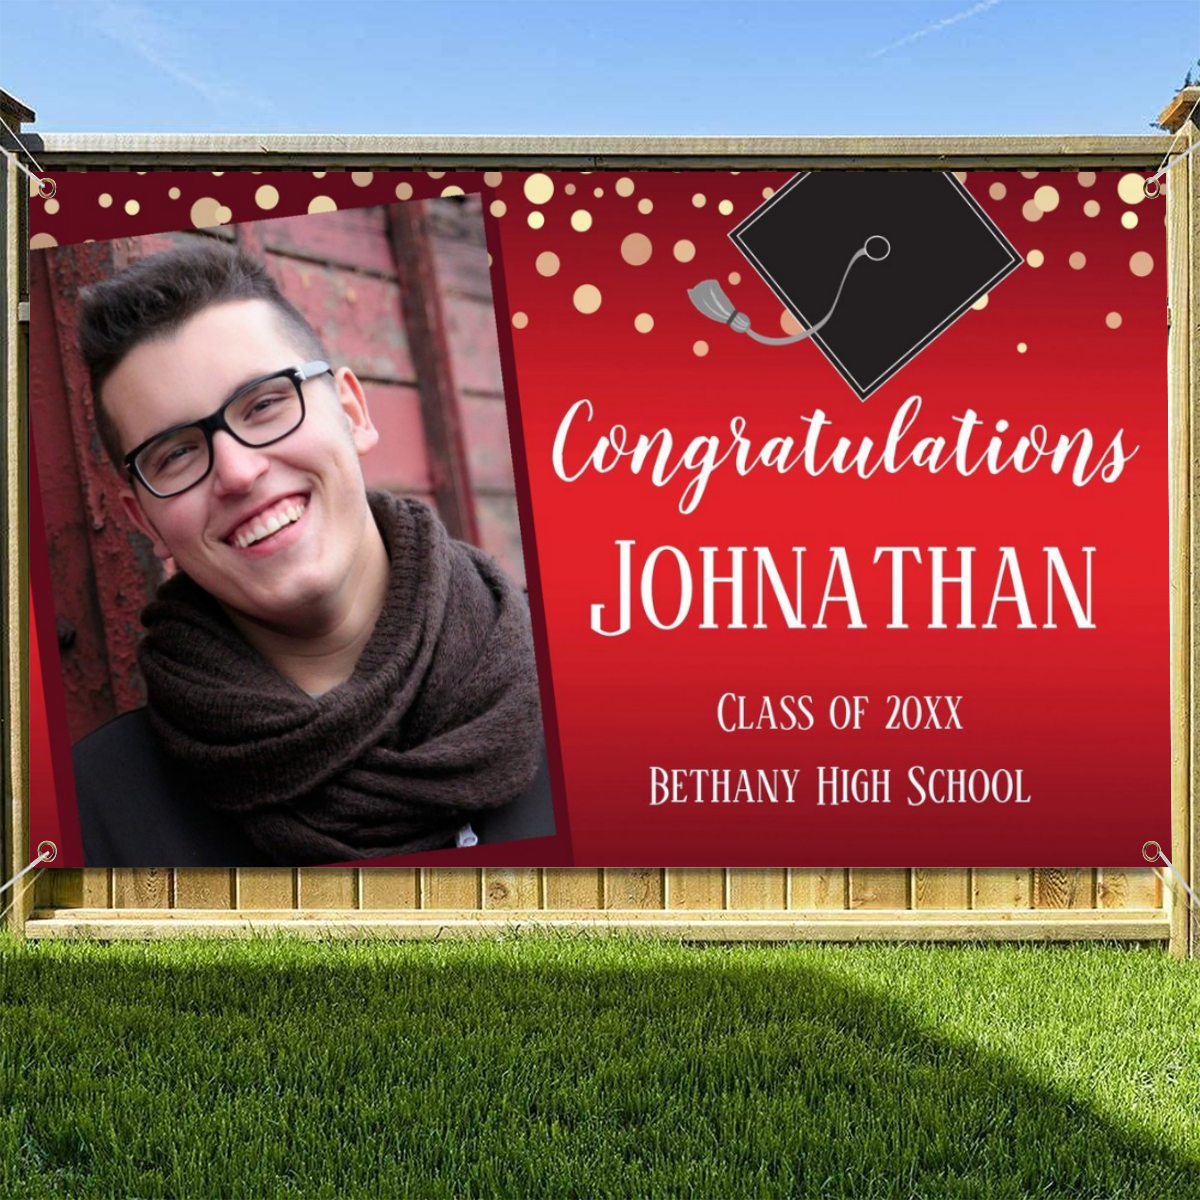 2022 Personalized Name/Photo, Congratulations Graduation Red with Confetti Photo Banner